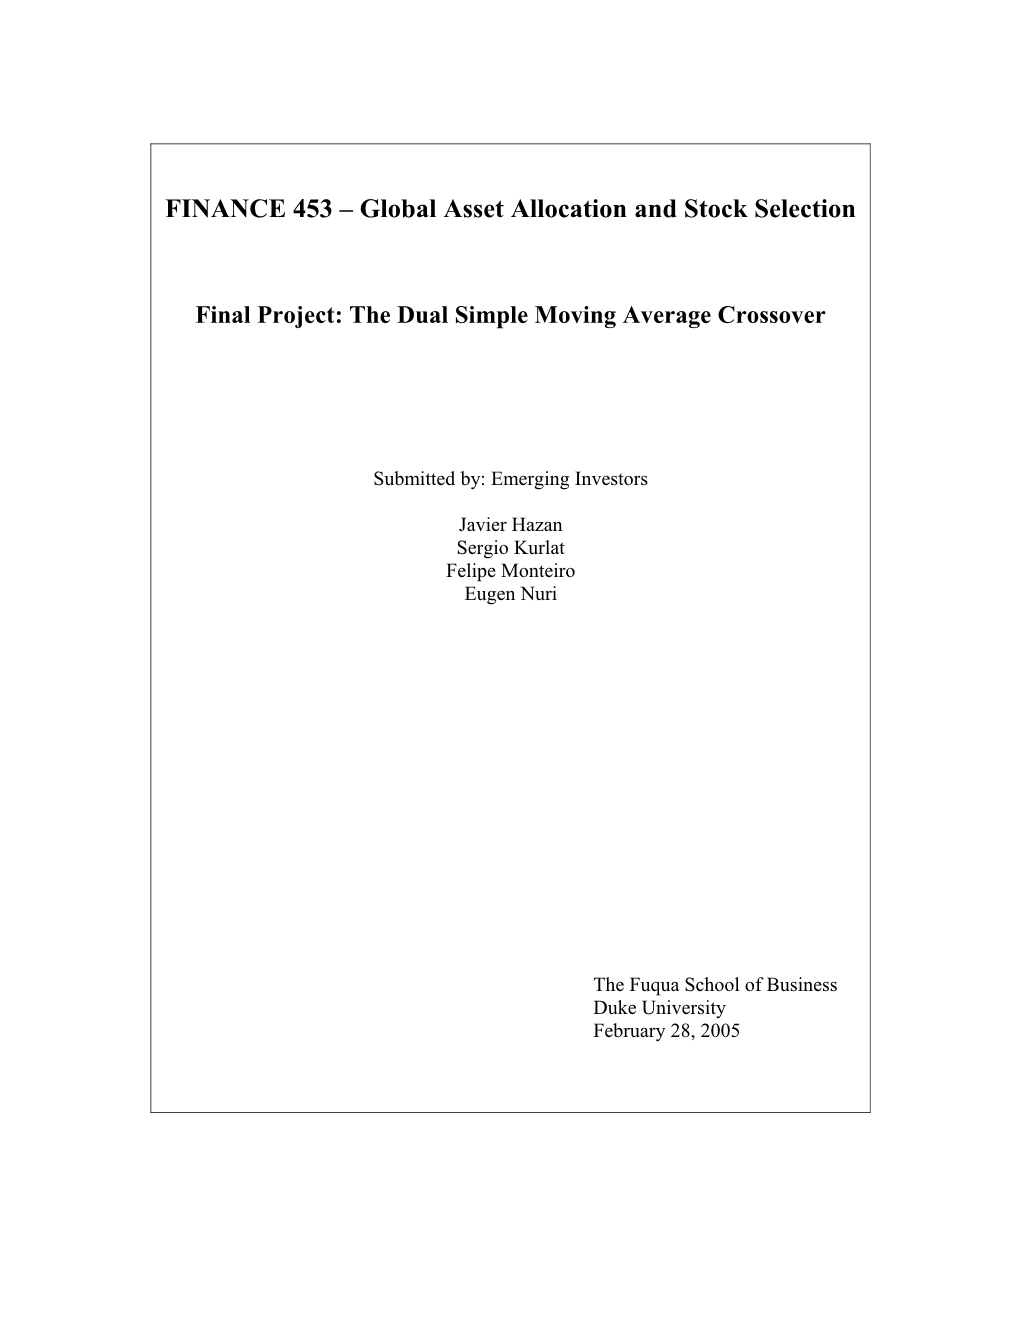 Global Asset Allocation and Stock Selection